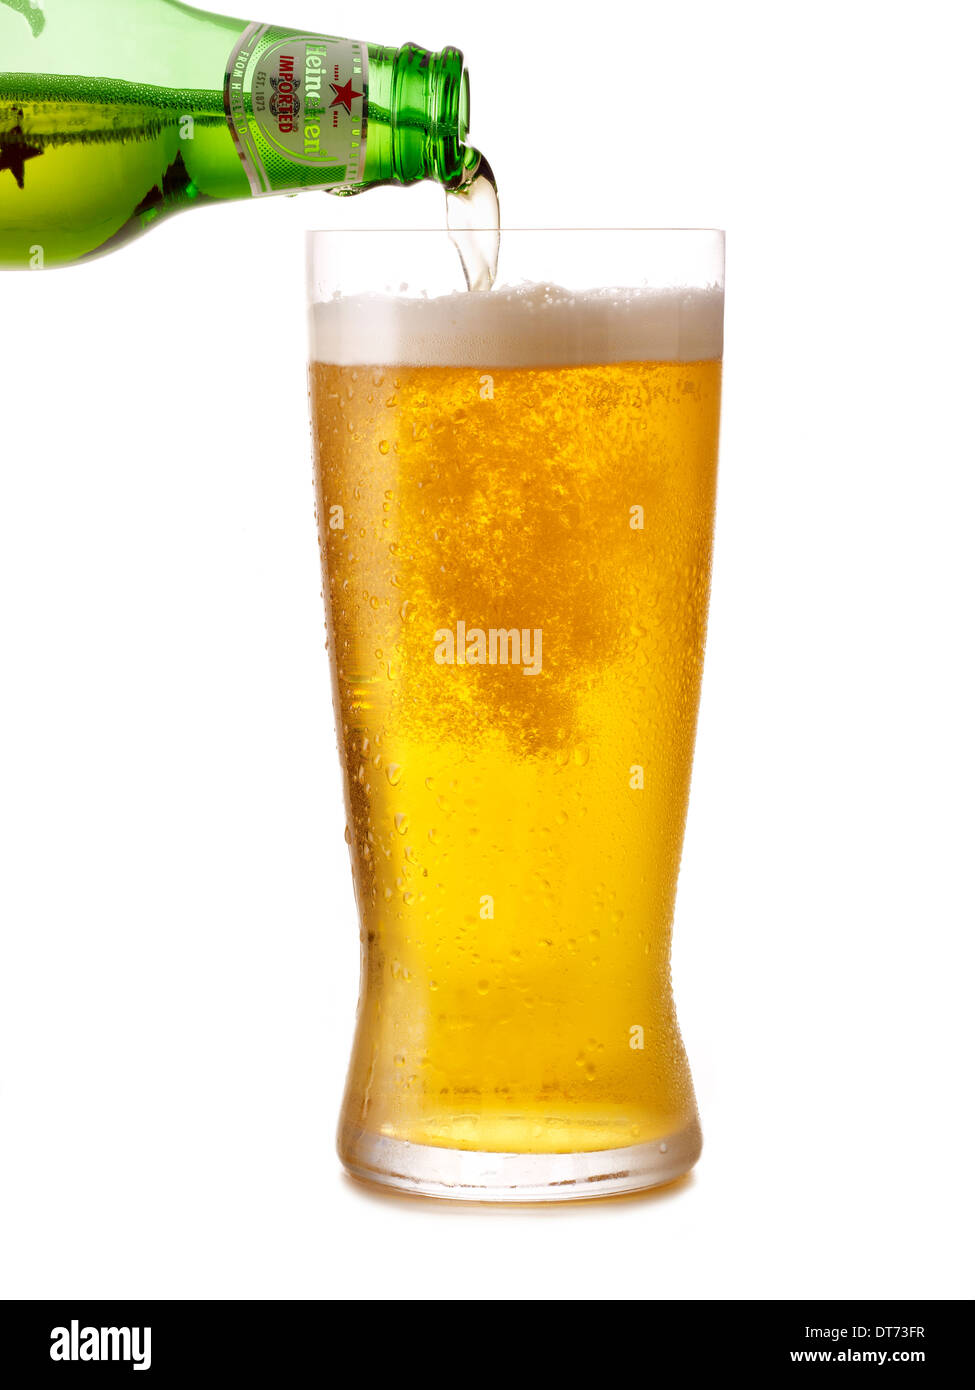 A bottle of Heineken beer being poured into a glass on a white background Stock Photo